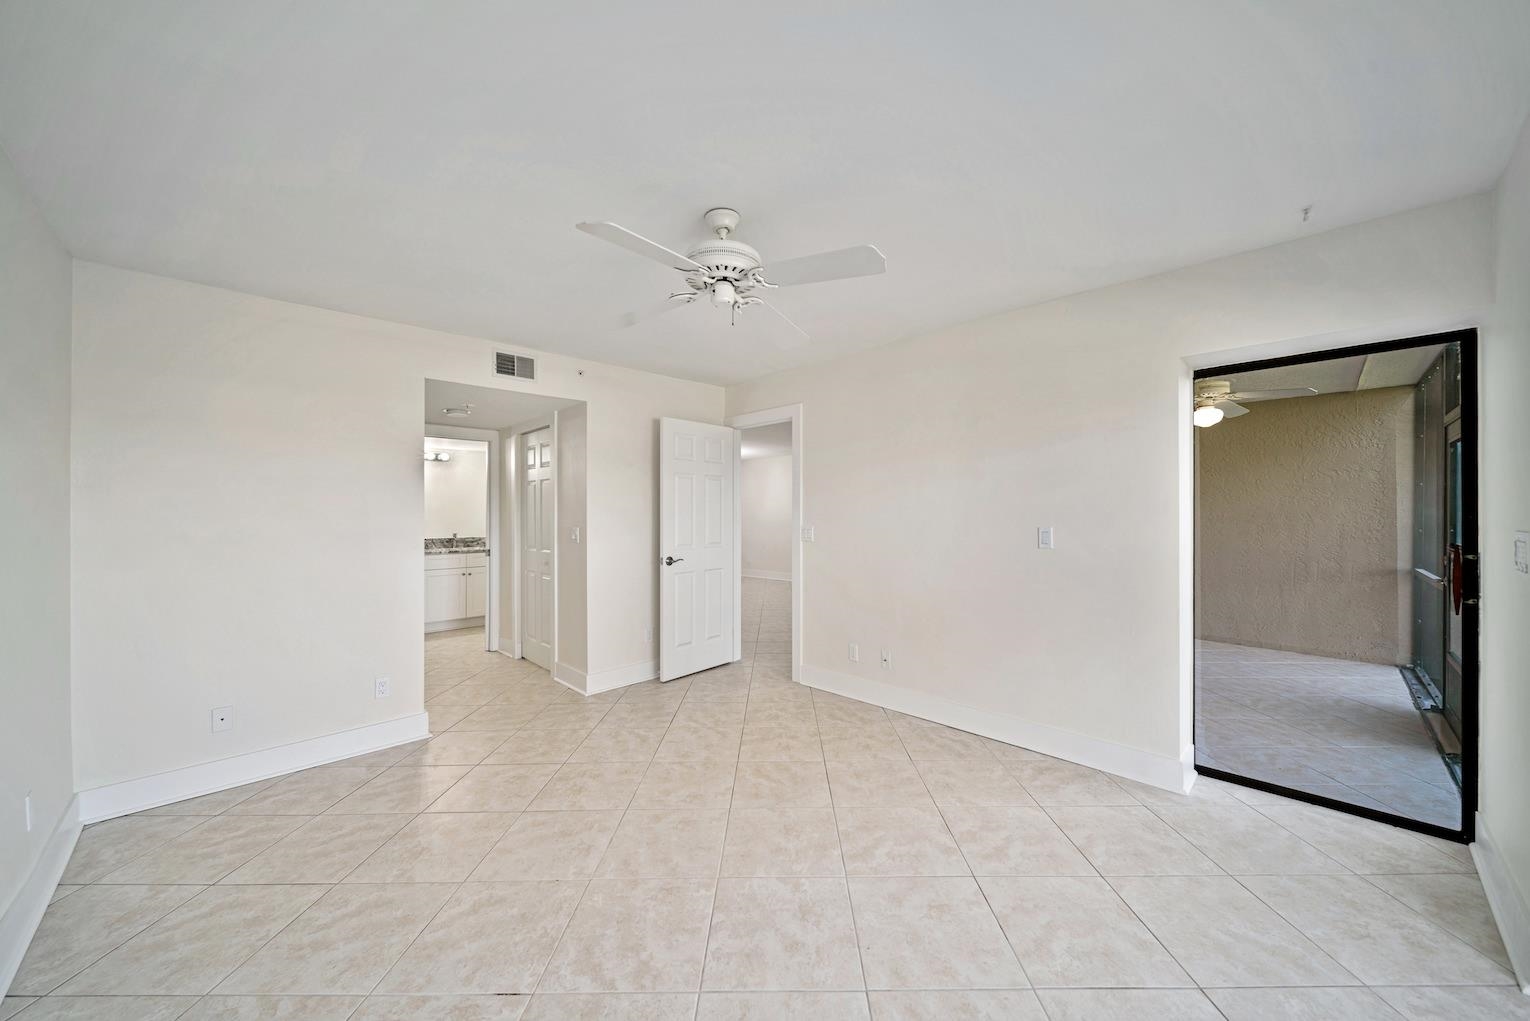 16260 Kelly Cove Dr, Fort Myers, Florida 33908, 2 Bedrooms Bedrooms, ,2 BathroomsBathrooms,Condo,For Sale,Kelly Cove Dr,2230932